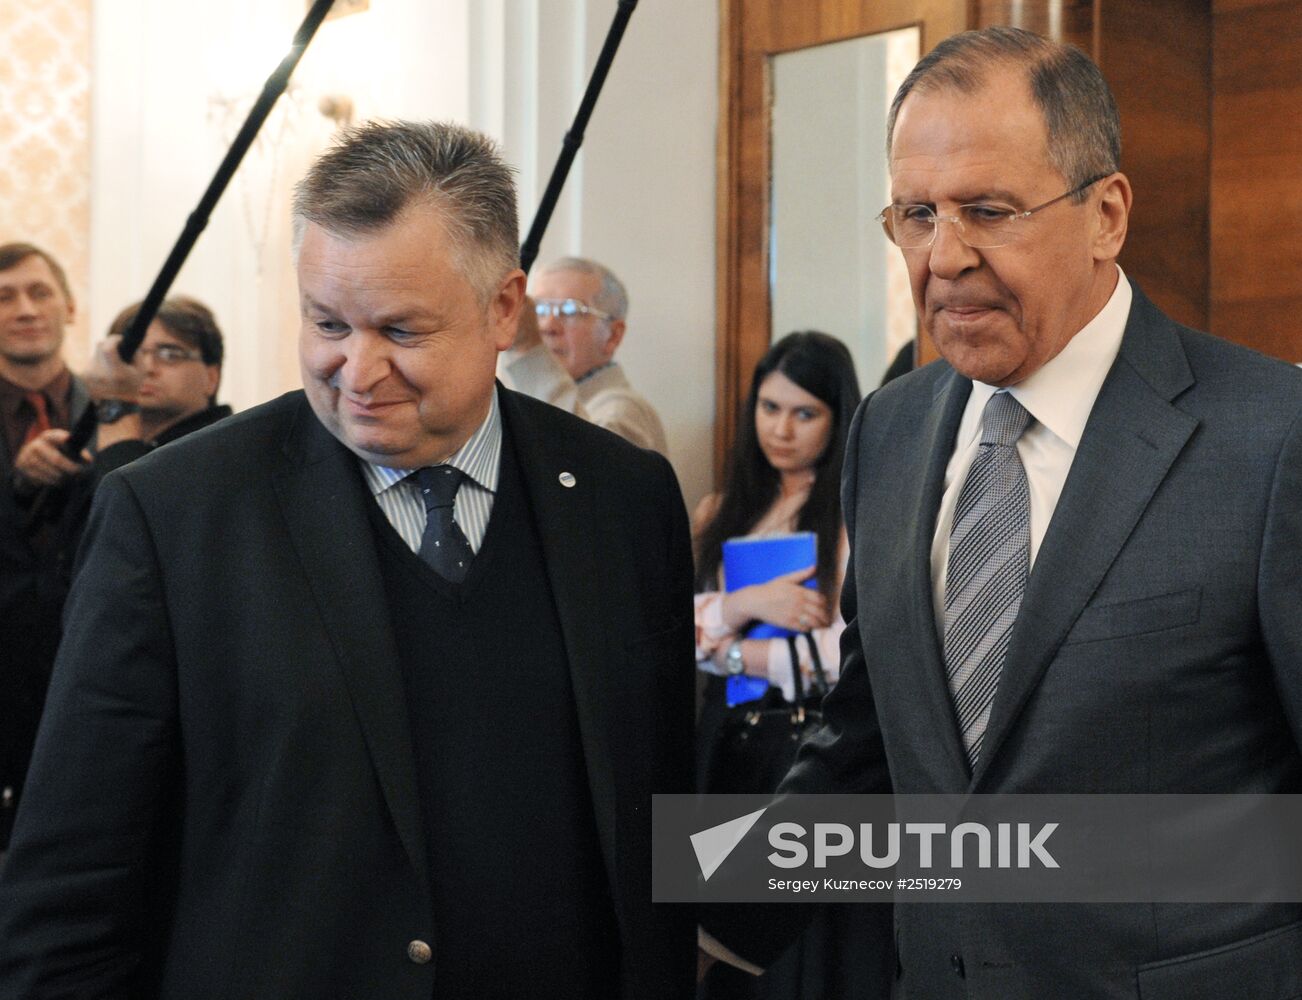 Russian Foreign Minister Sergey Lavrov meets with Michael Link